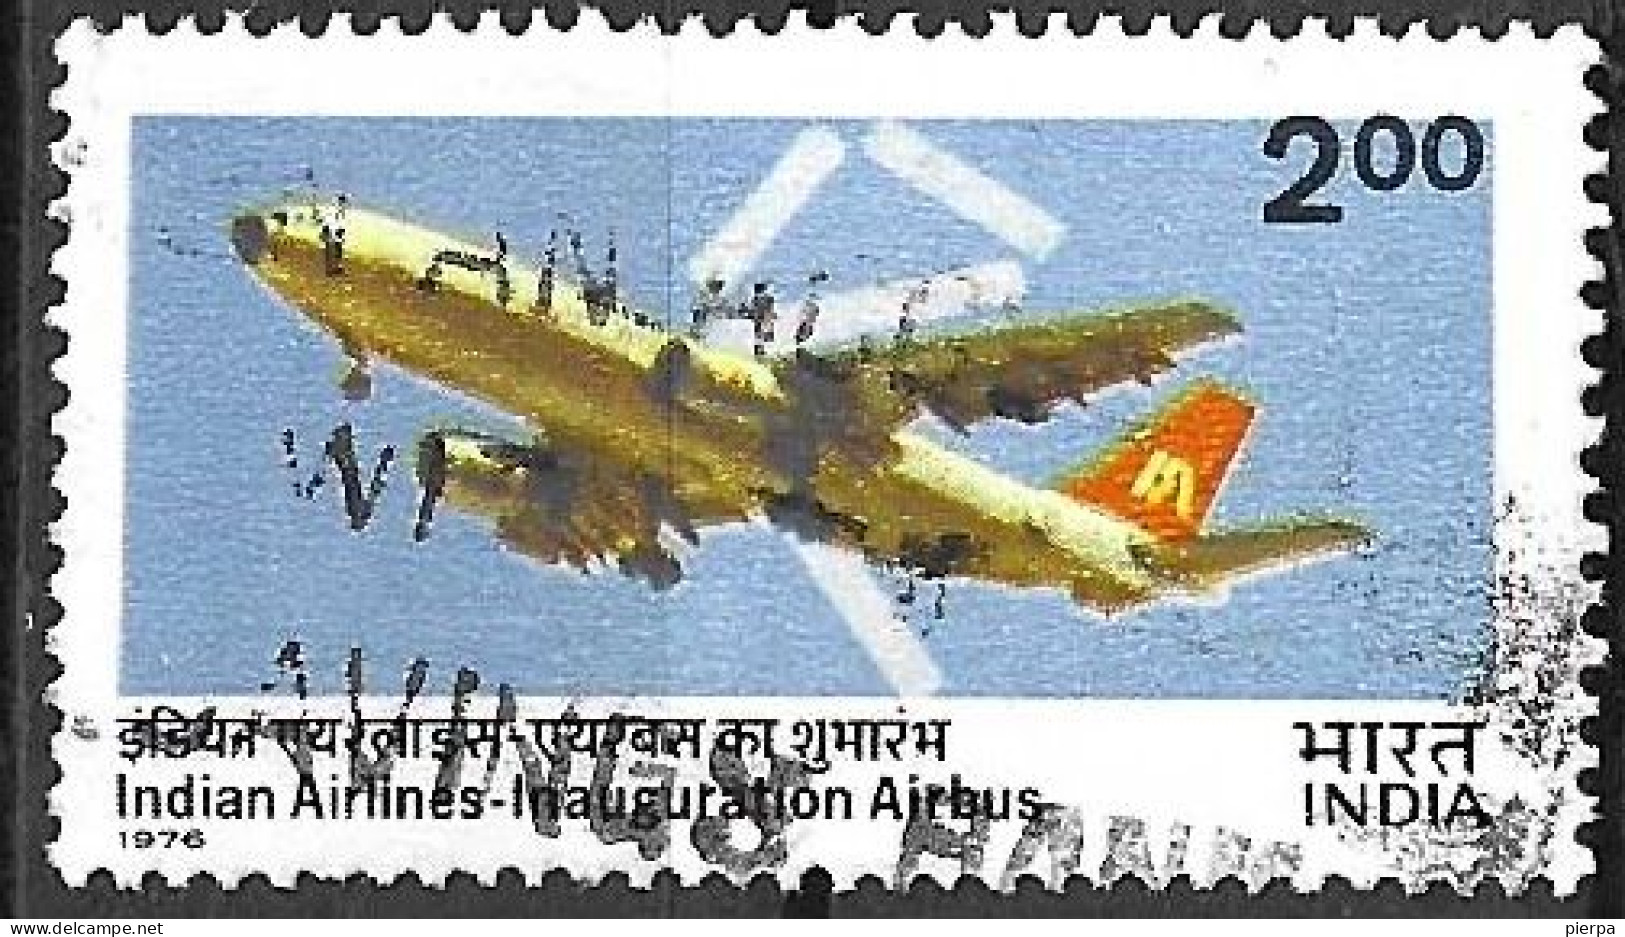 INDIA - 1976 - INDIAN AIRLINES AIRBUS -  USATO (YVERT 503 - MICHEL 701) - Used Stamps